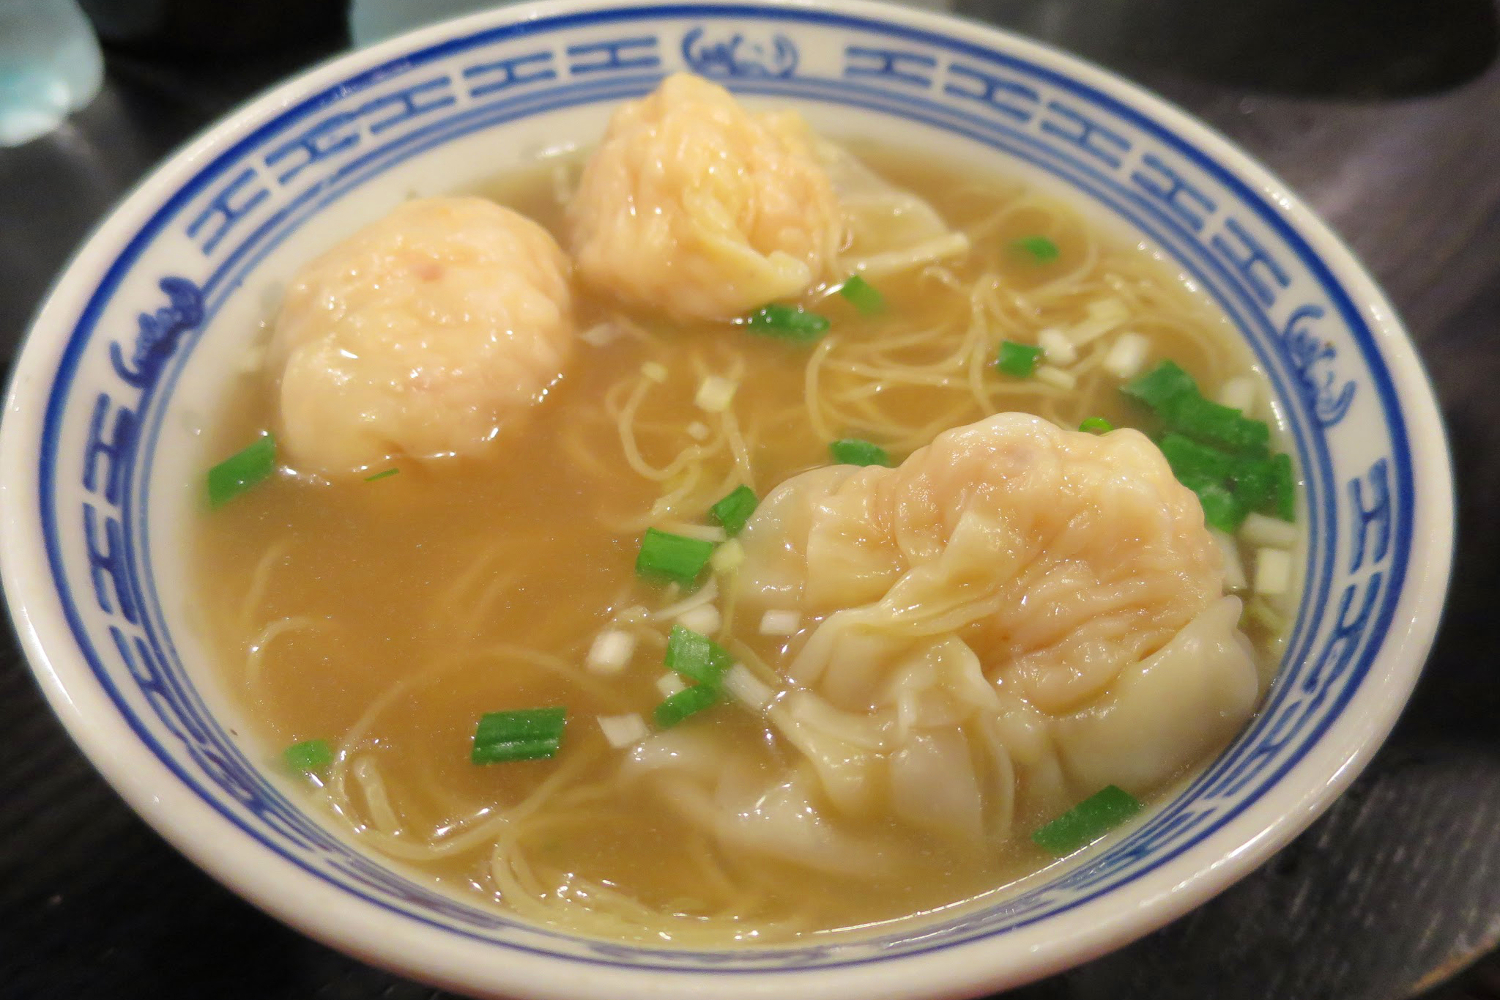 Clouds in a scroll painting: perfect wonton noodles. Image by Megan Eaves / londoninfopage